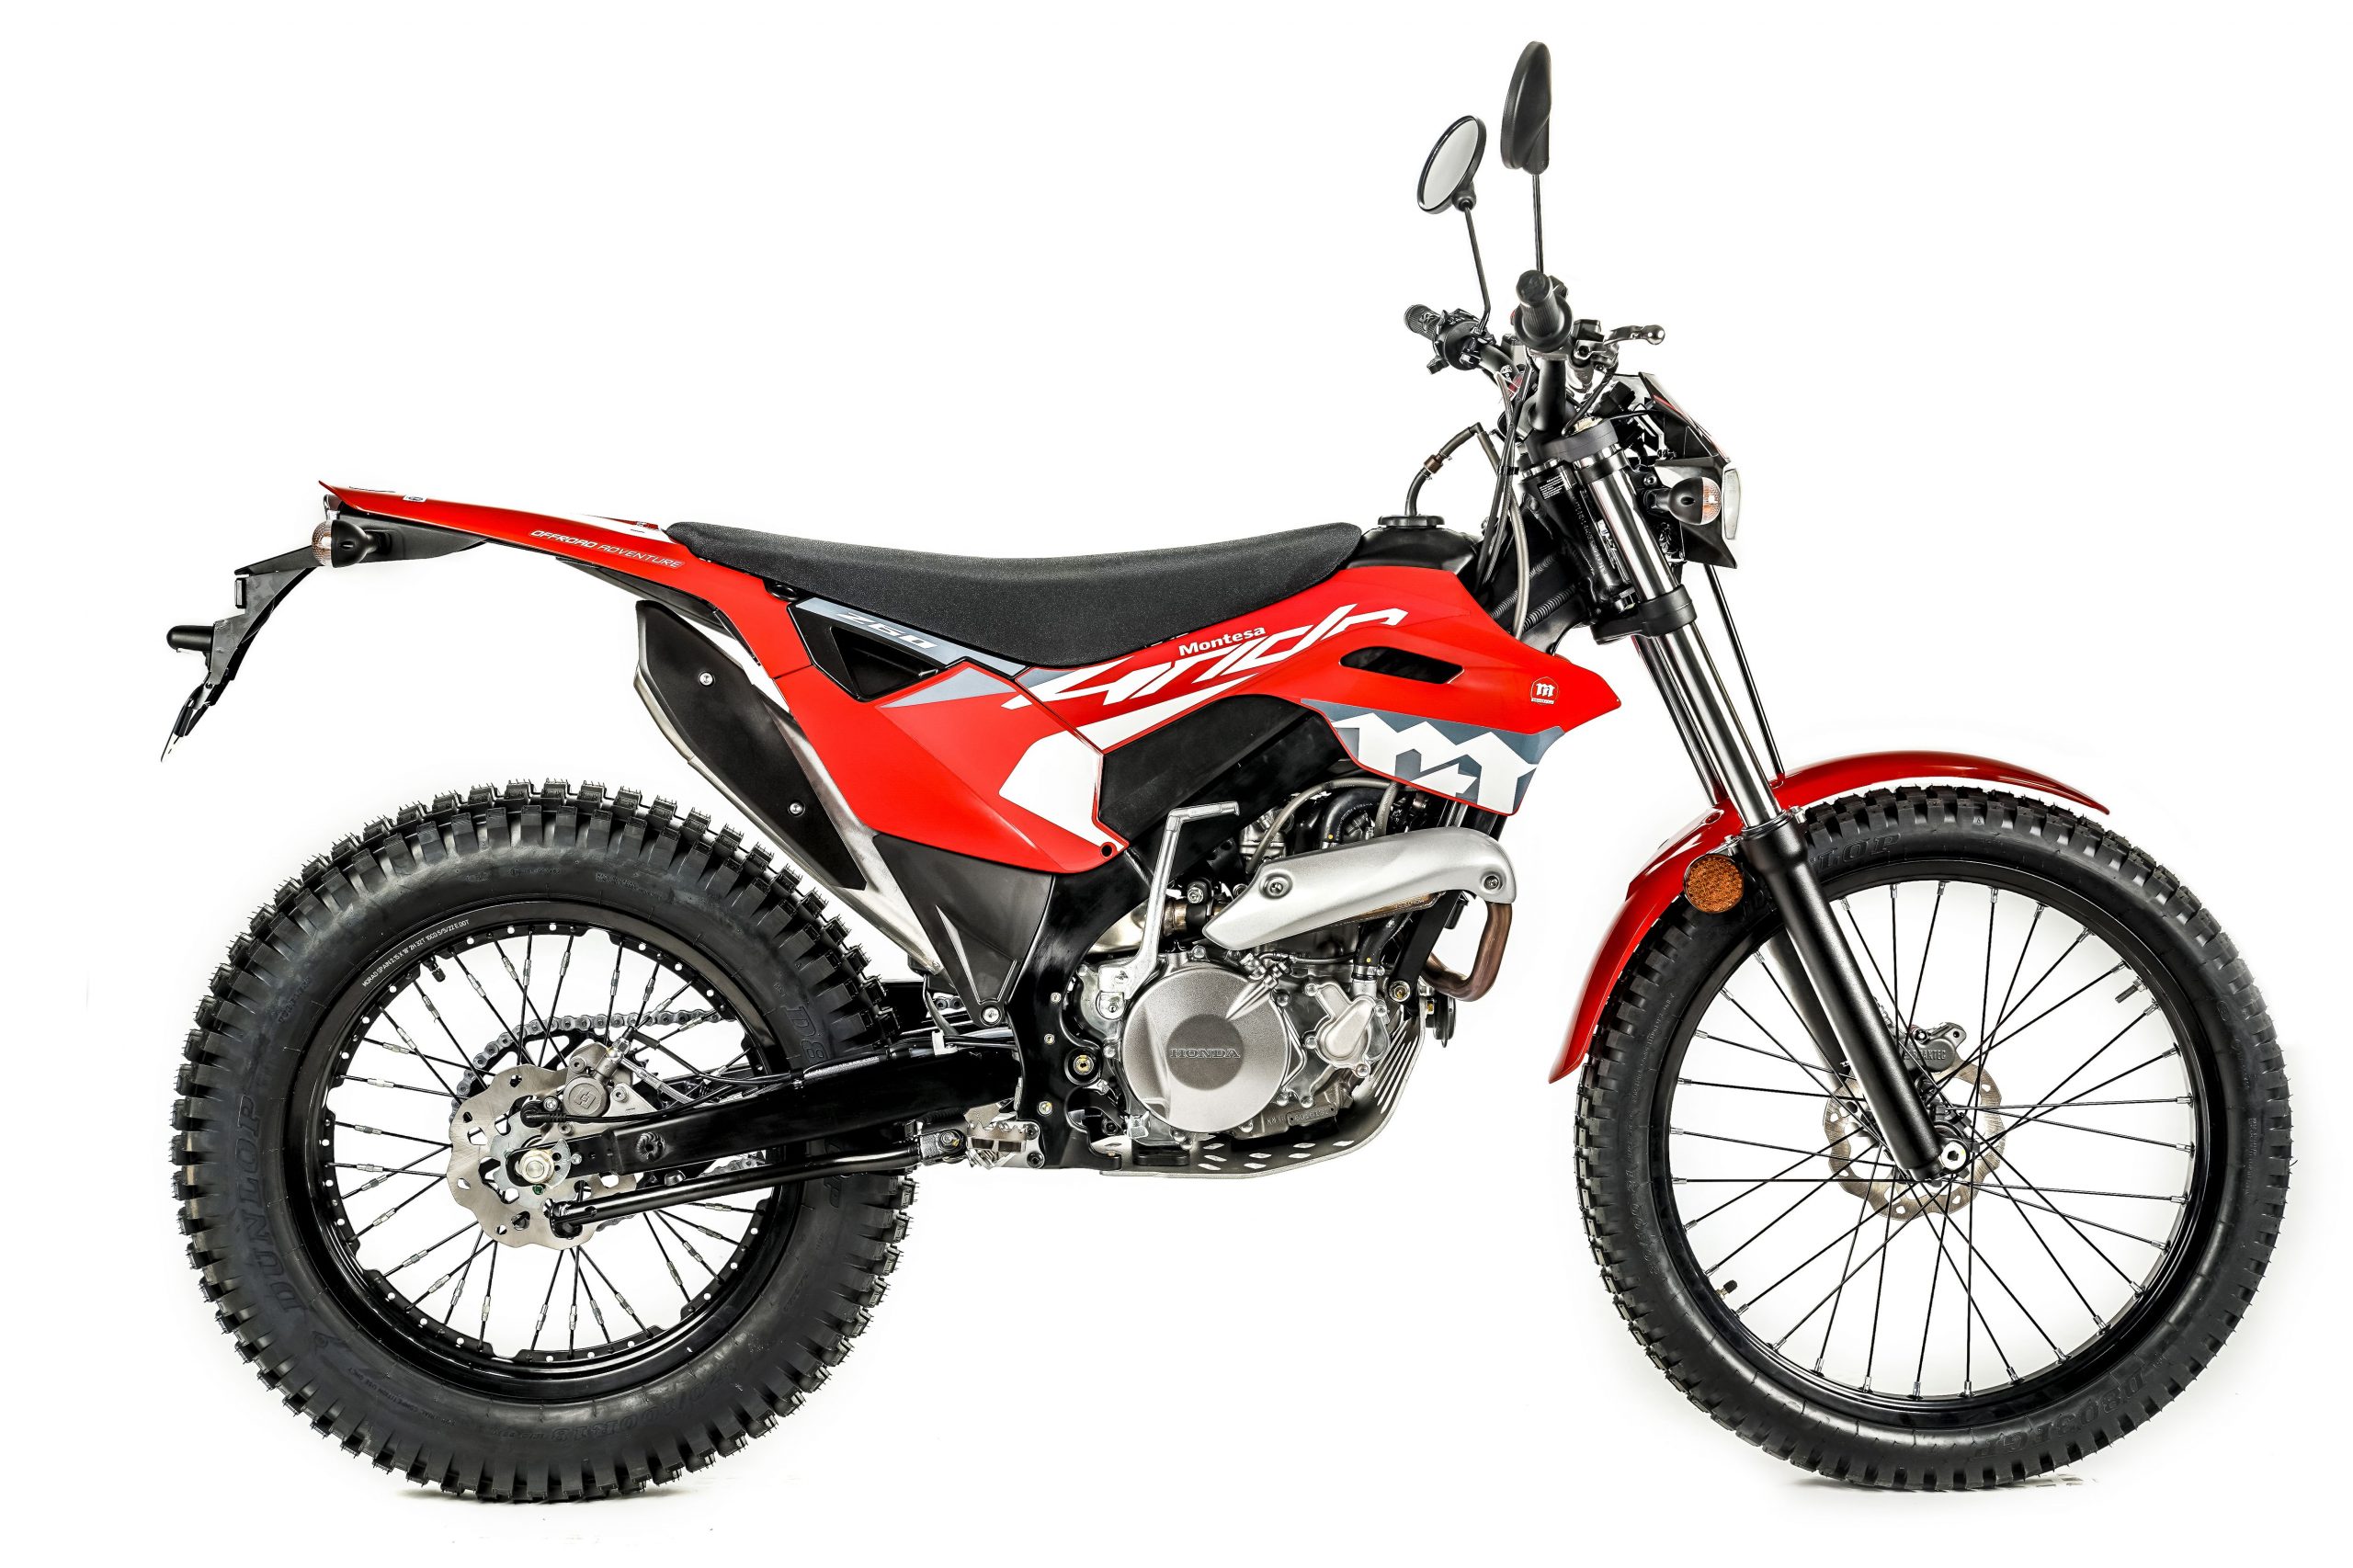 Montesa22_MY23_4Ride_4158-1_ps-LATERAL-DERECHA-scaled.jpg